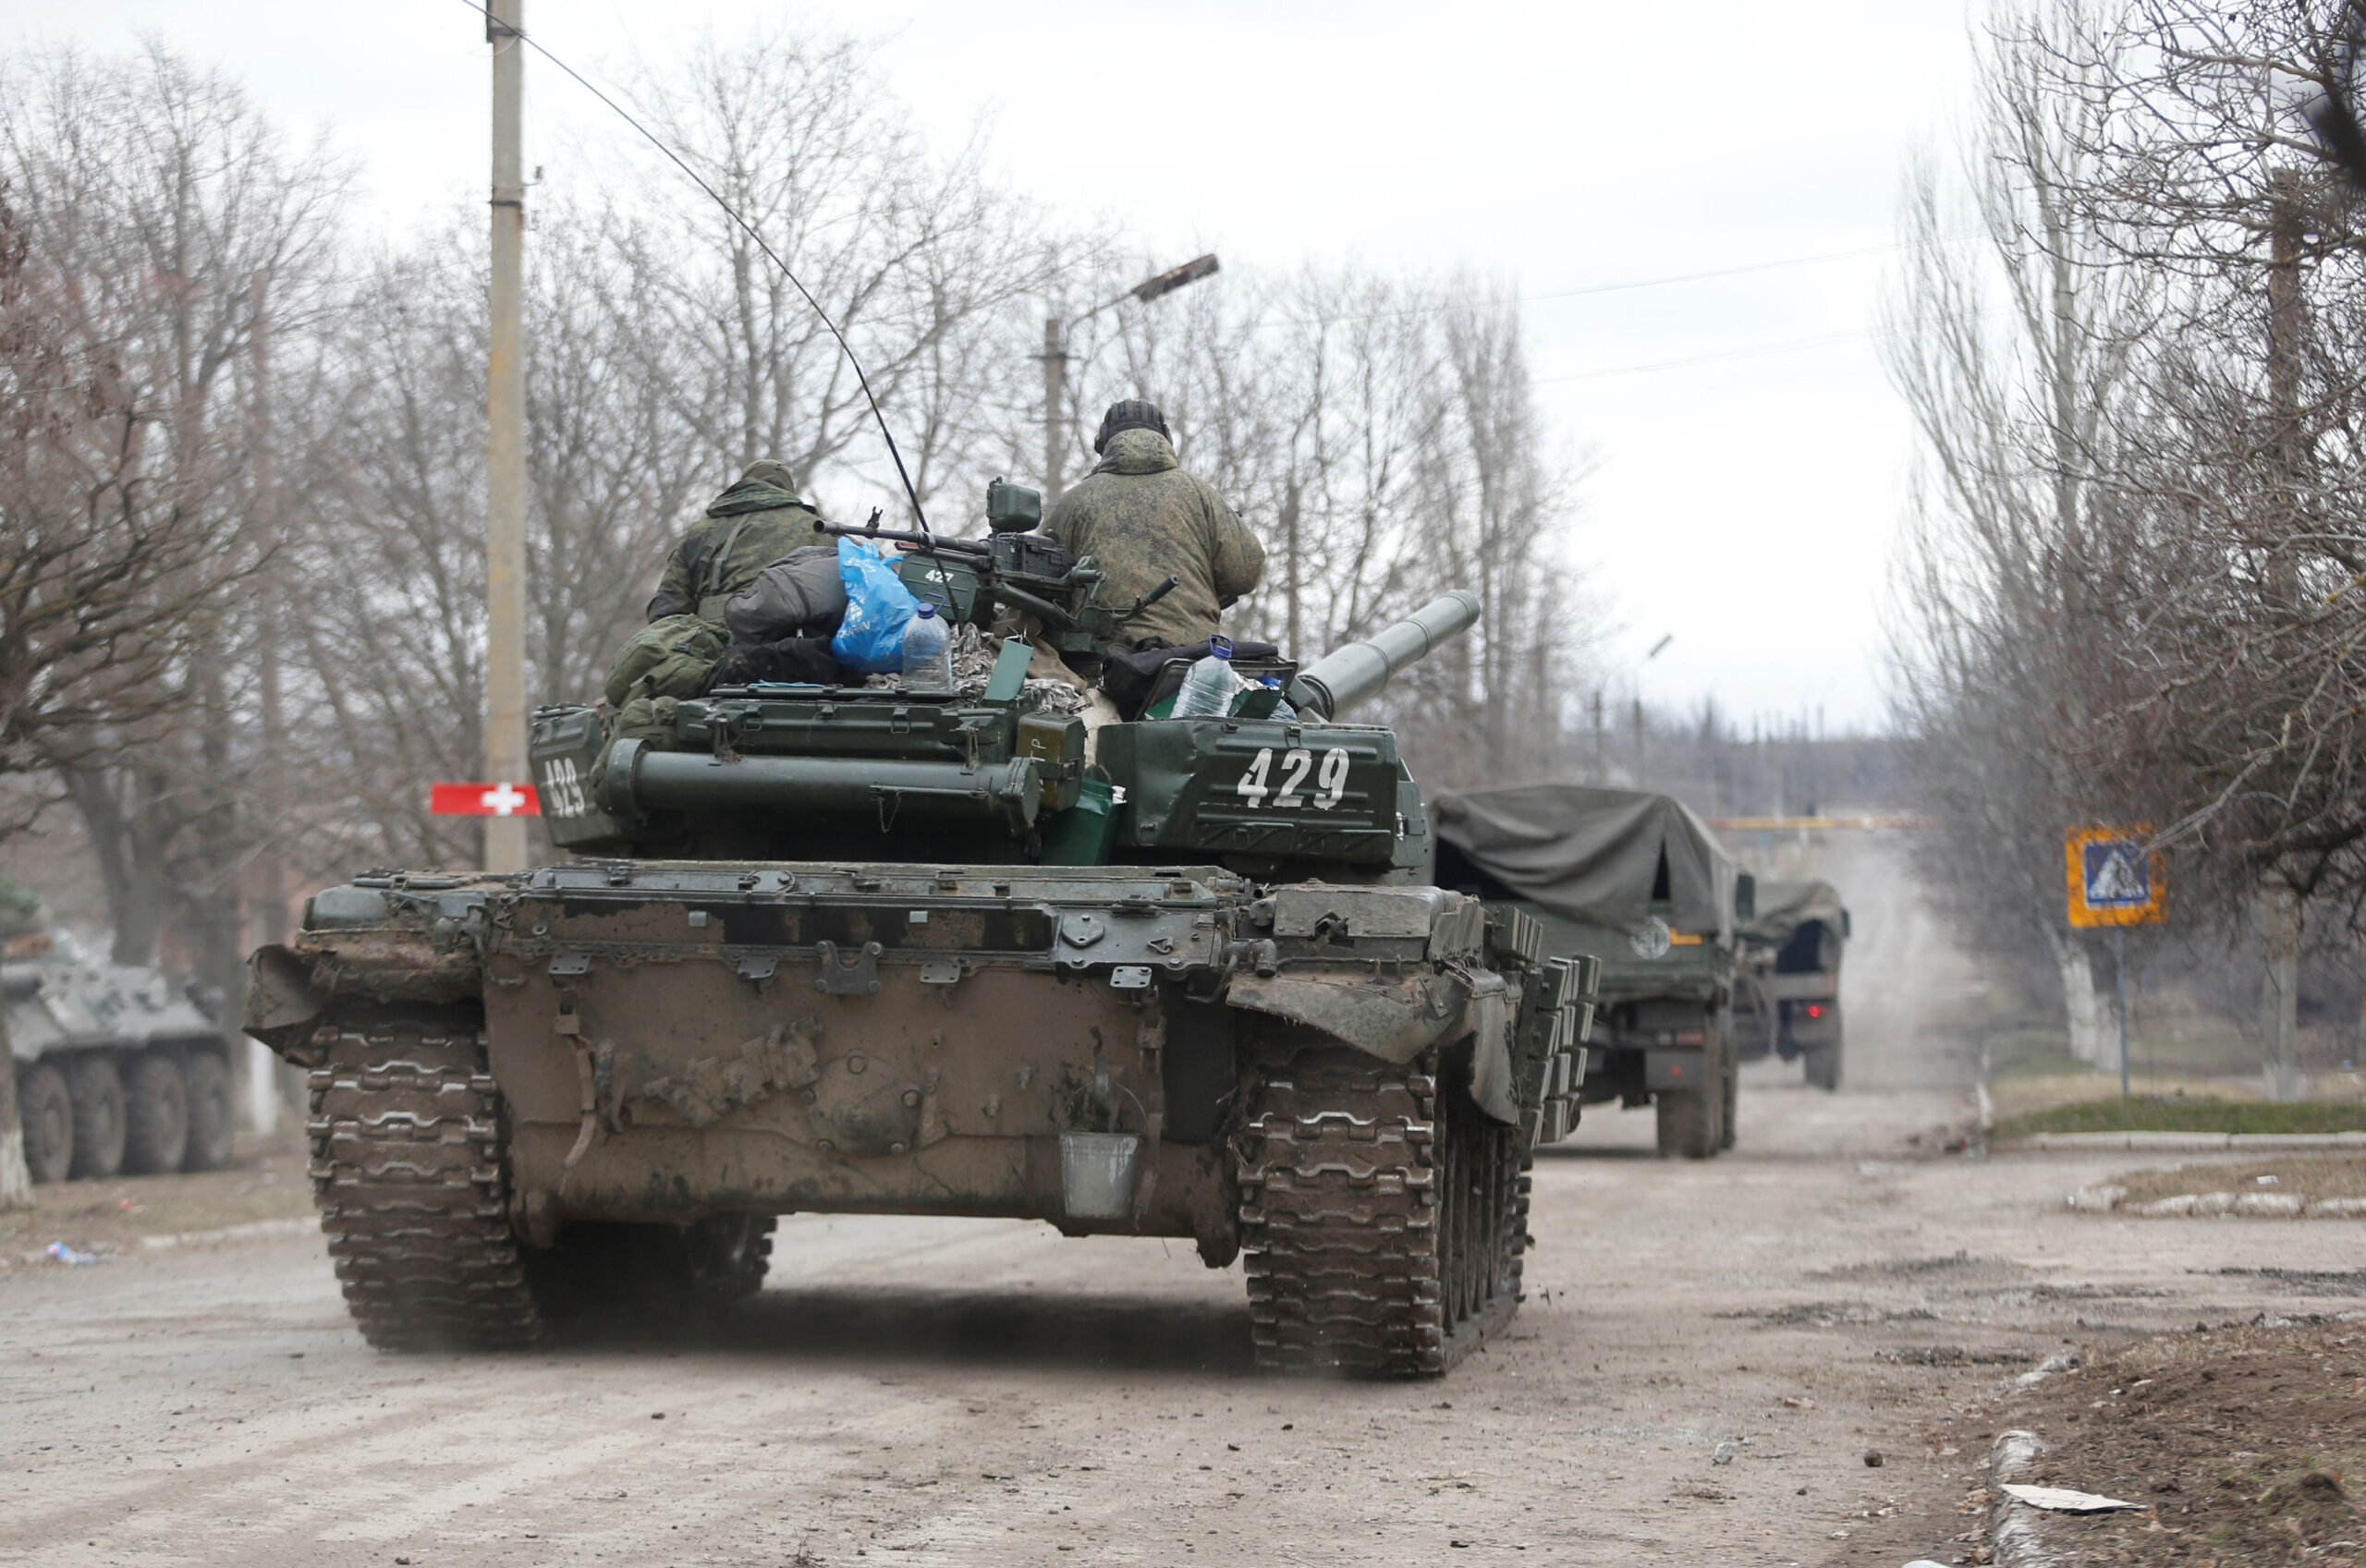 Russian convoy advance toward Kiev stalled by resistance, US says - Latin america News